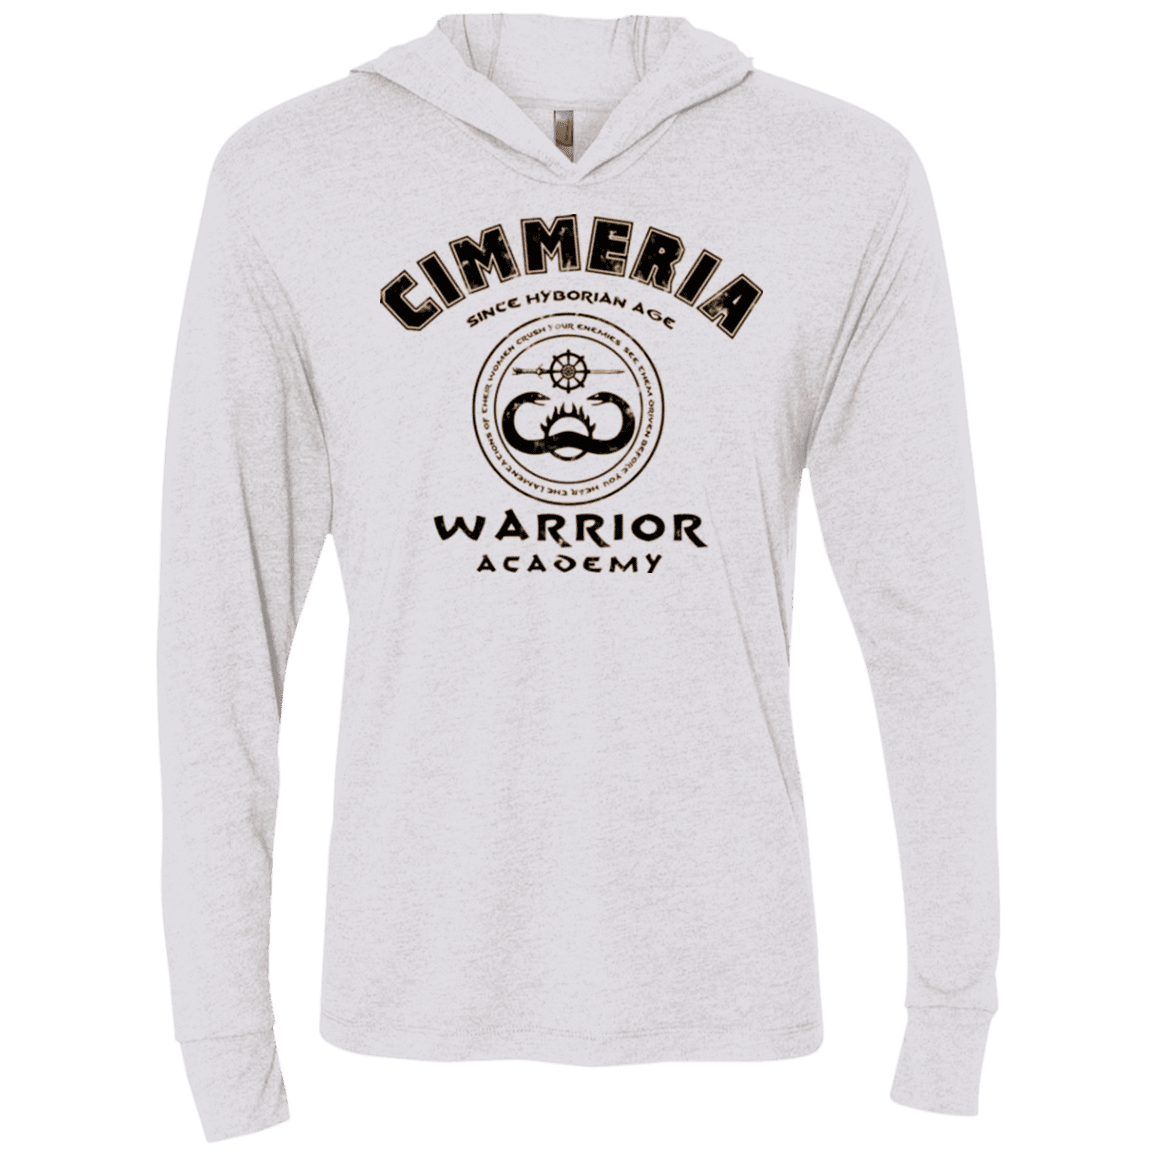 T-Shirts Heather White / X-Small Crimmeria Warrior academy Triblend Long Sleeve Hoodie Tee